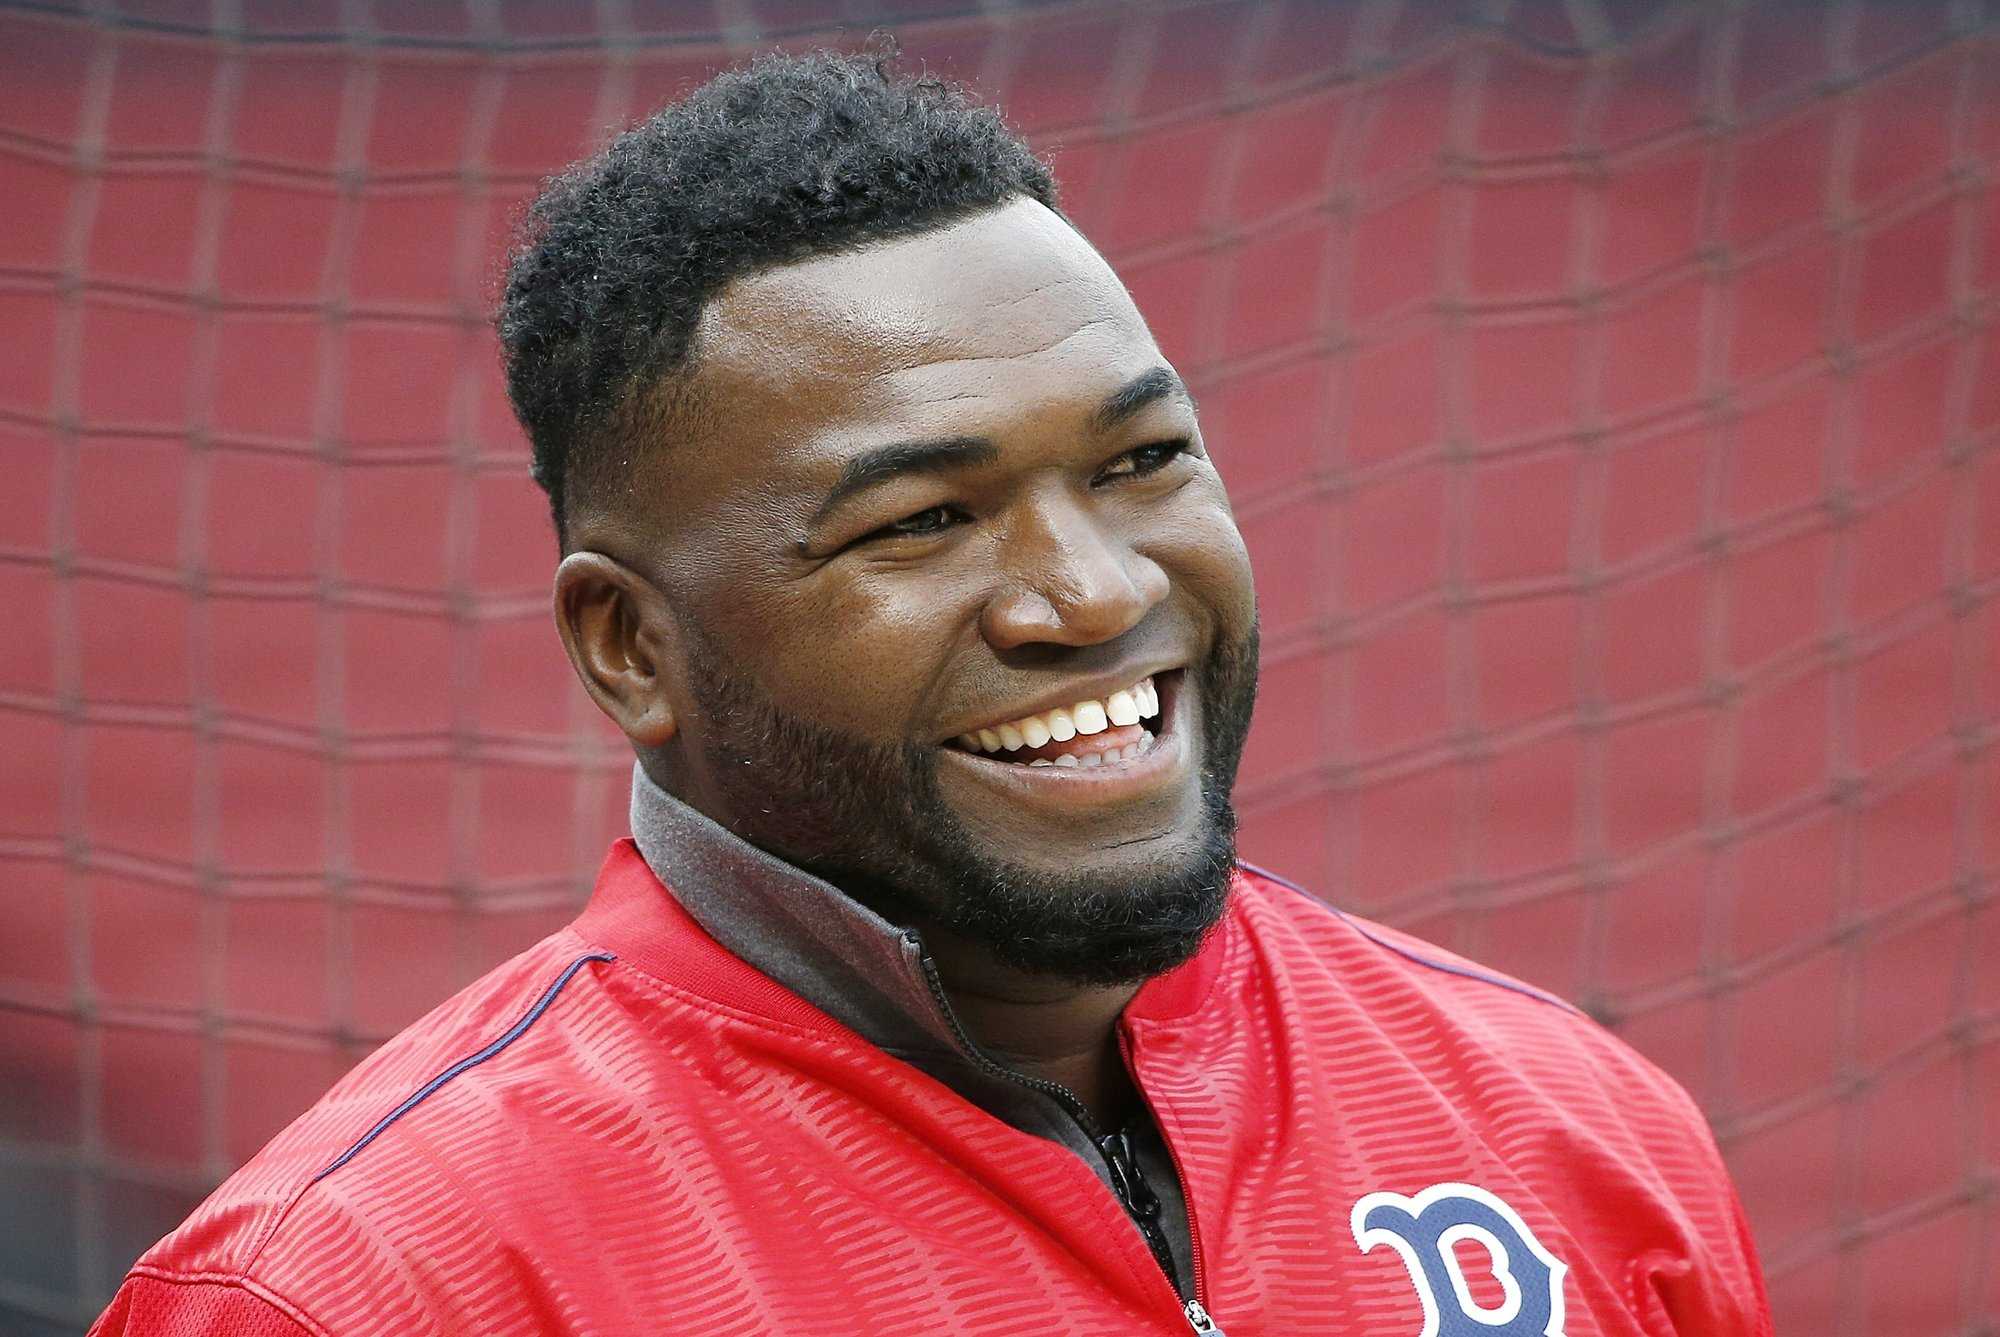 David Ortiz relishes his induction into Red Sox Hall of Fame: 'This is  home' - The Boston Globe